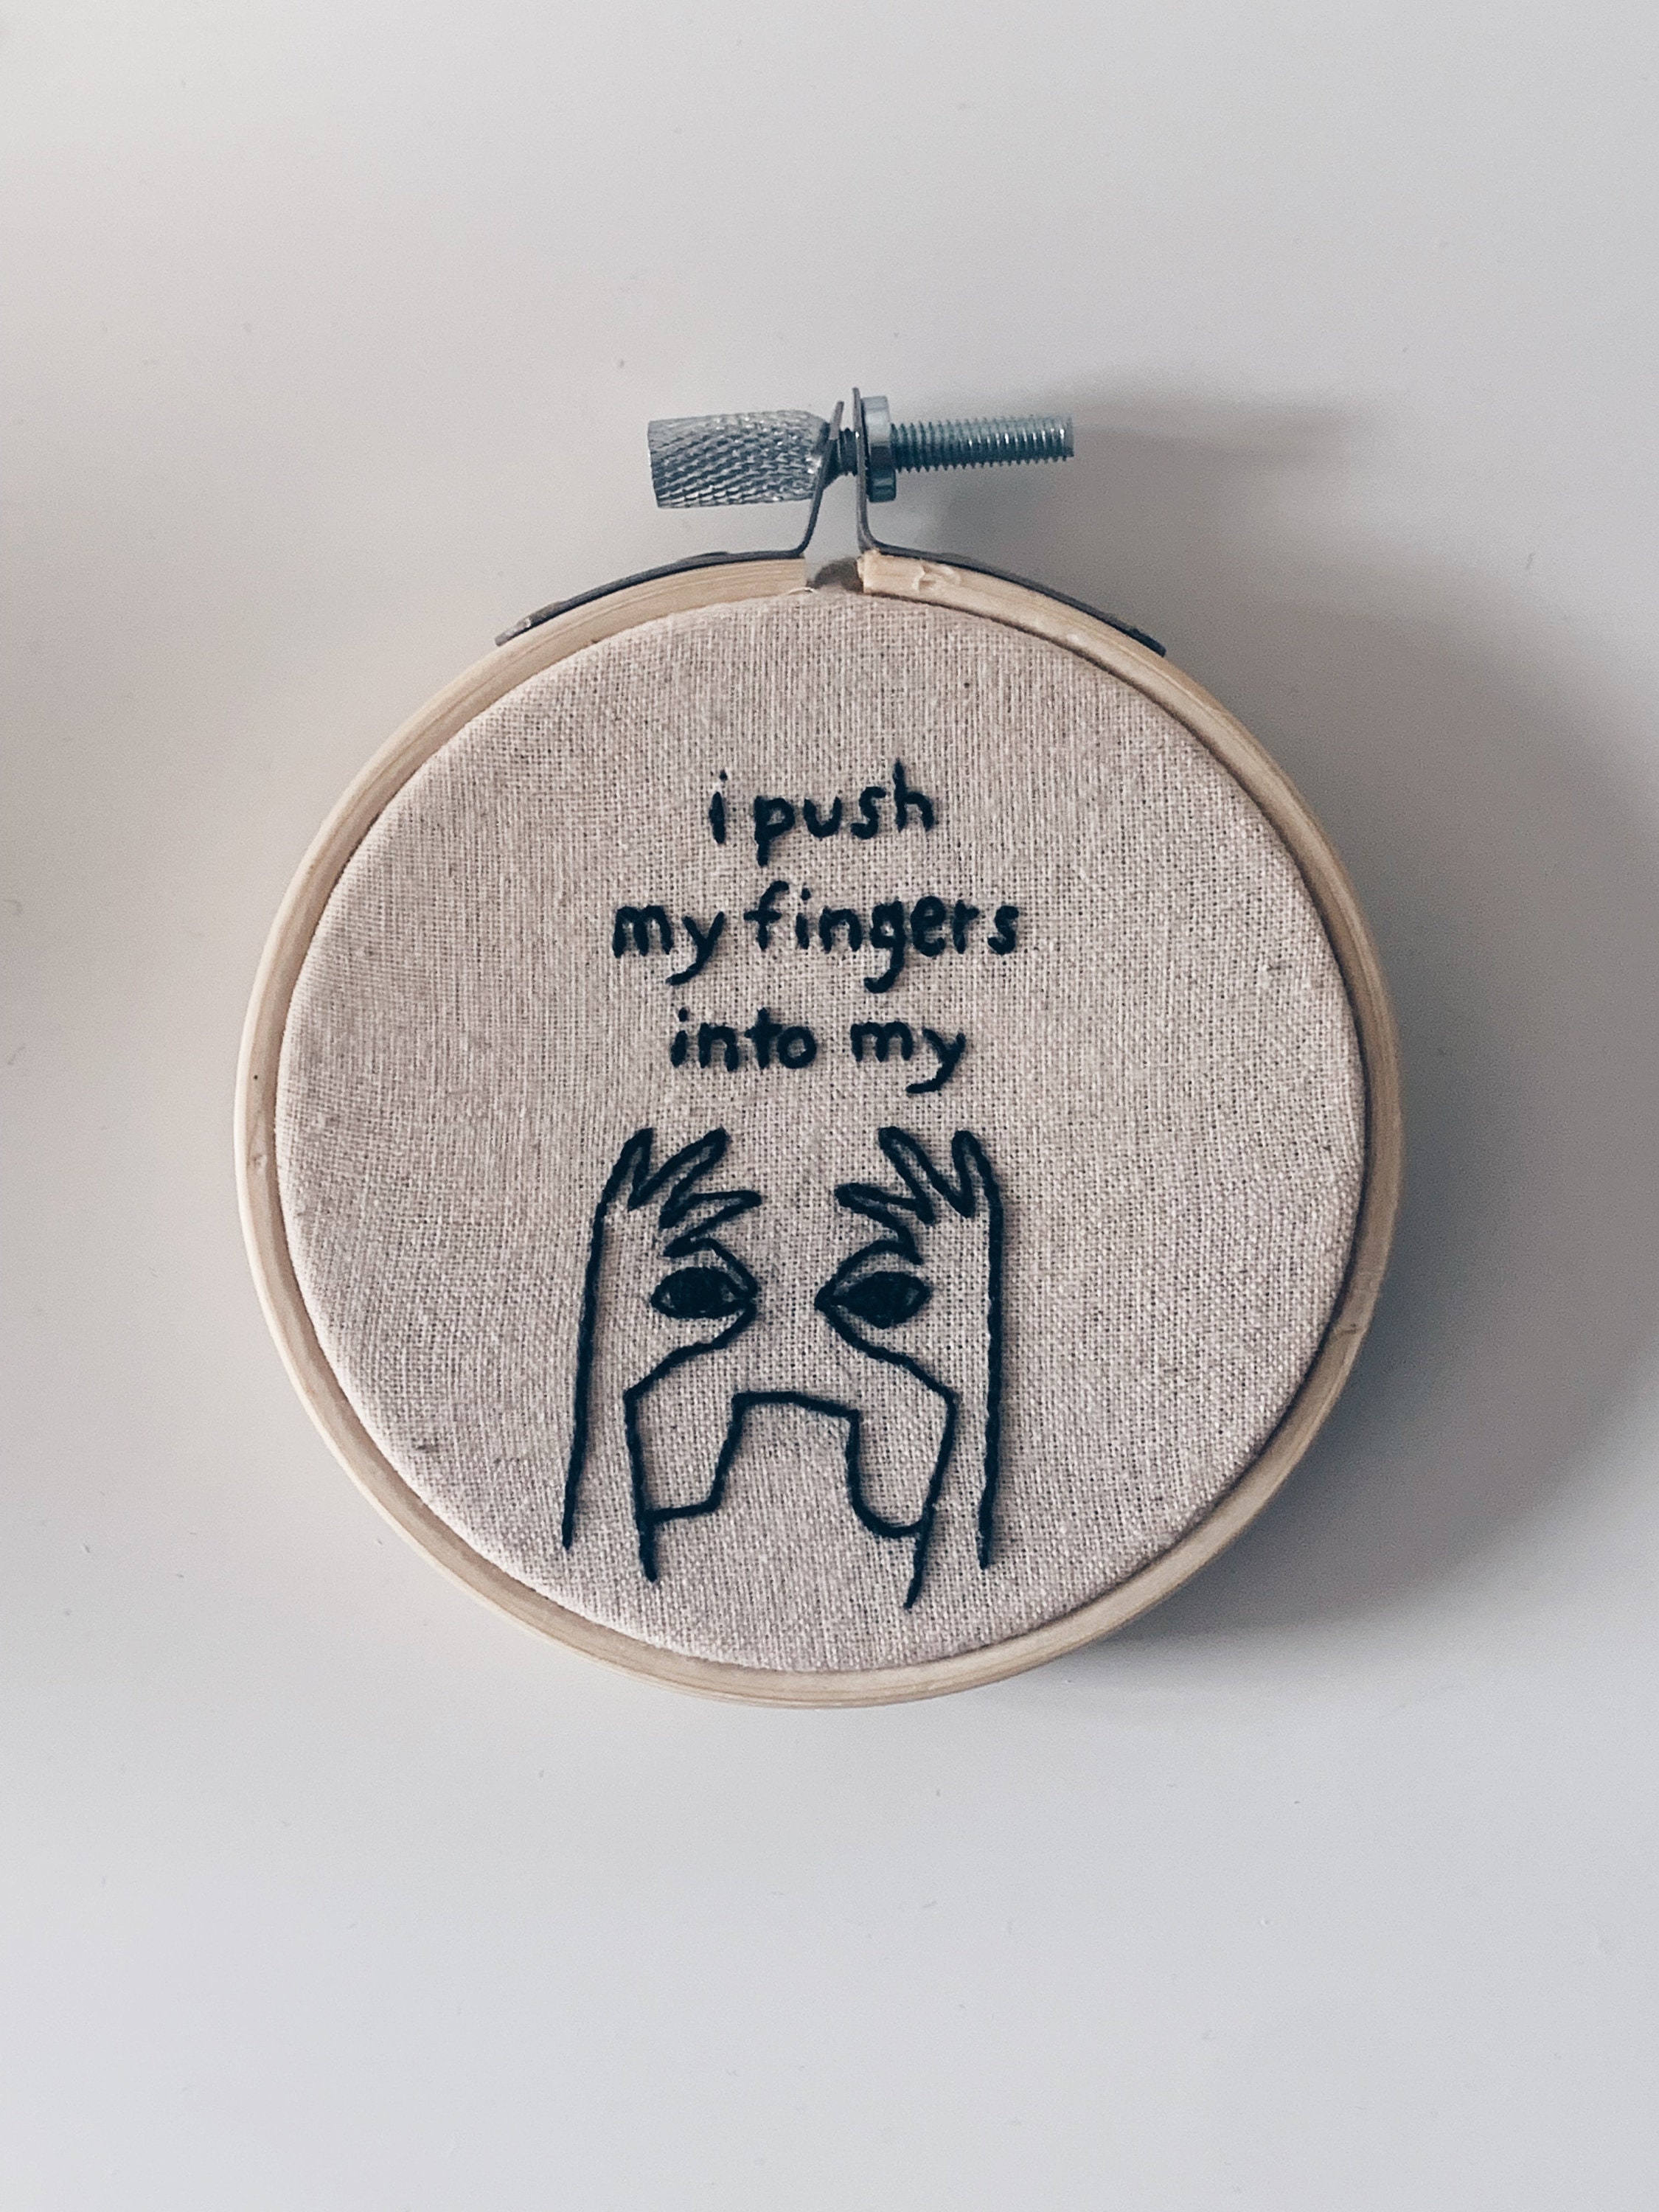 I push my fingers into my eyes - 3 inch Embroidery Hoop Art - Slipknot